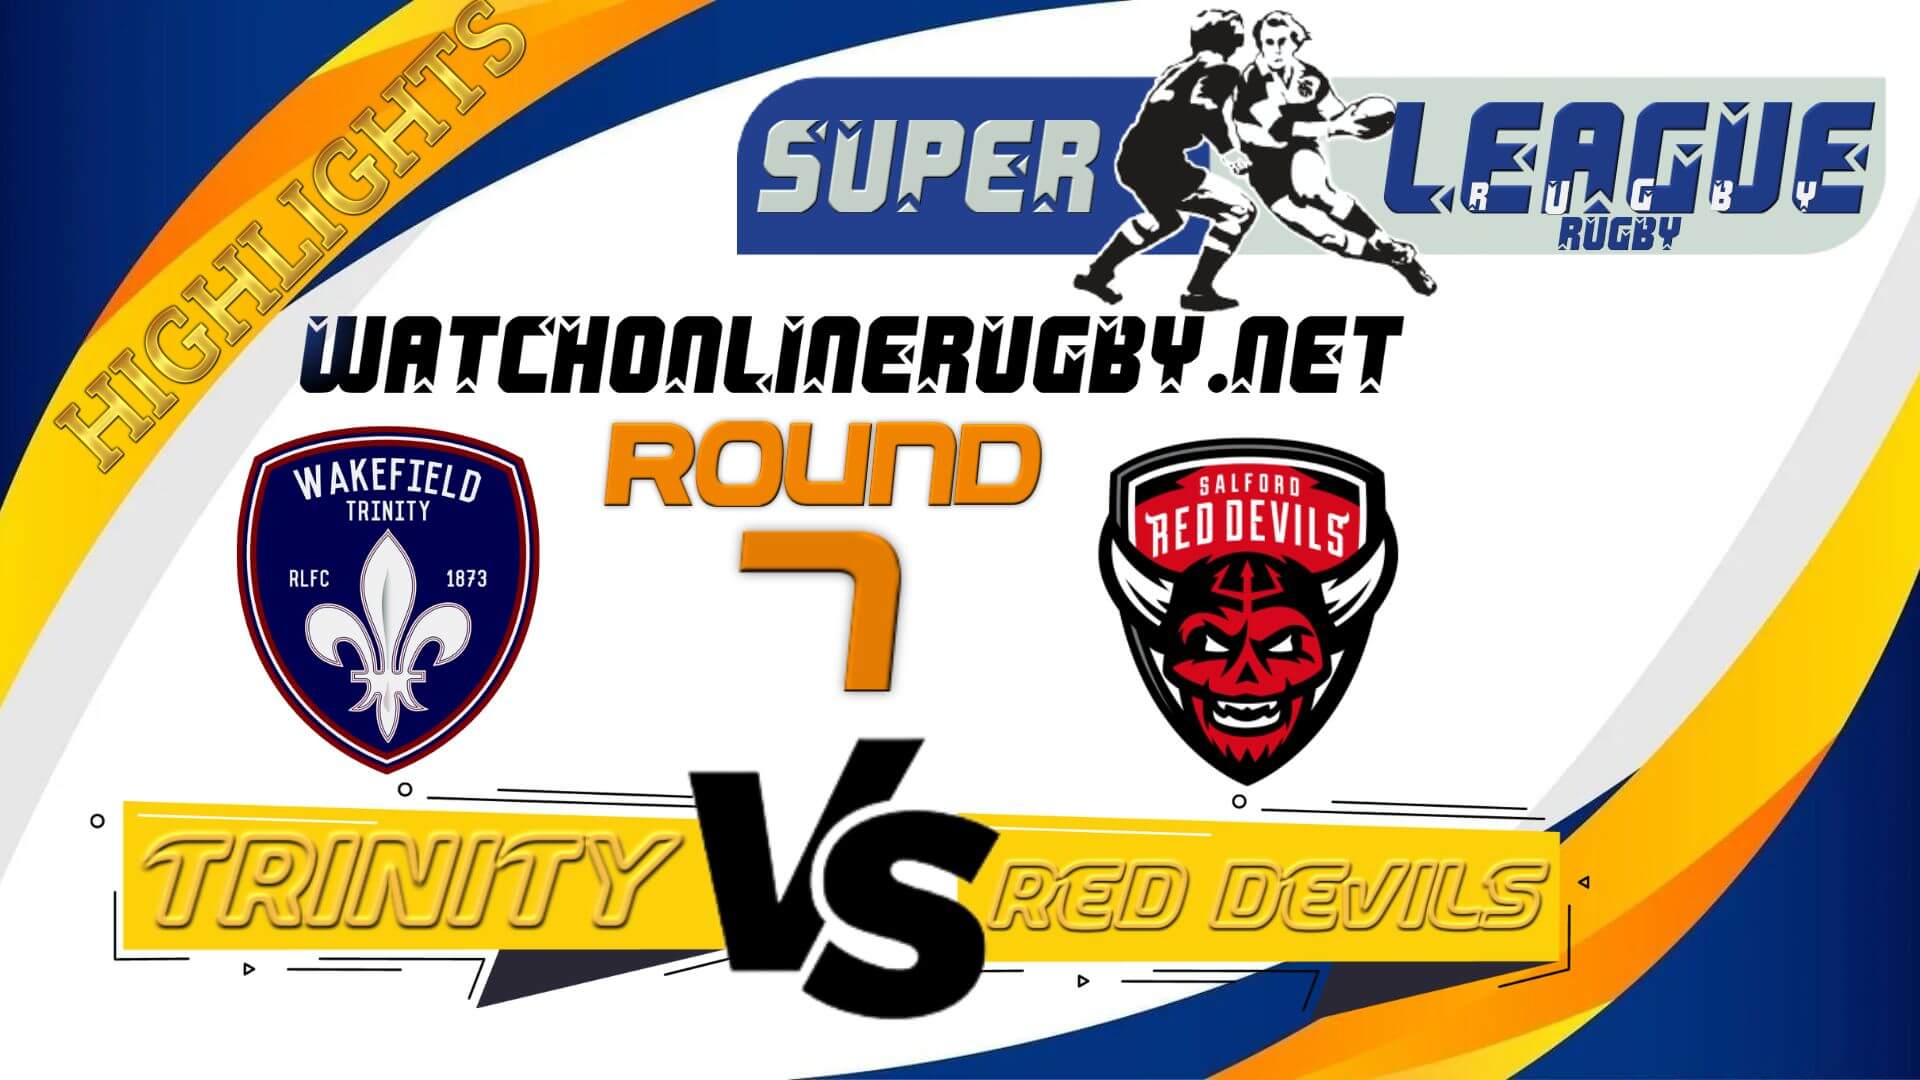 Wakefield Trinity Vs Salford Red Devils Super League Rugby 2022 RD 7